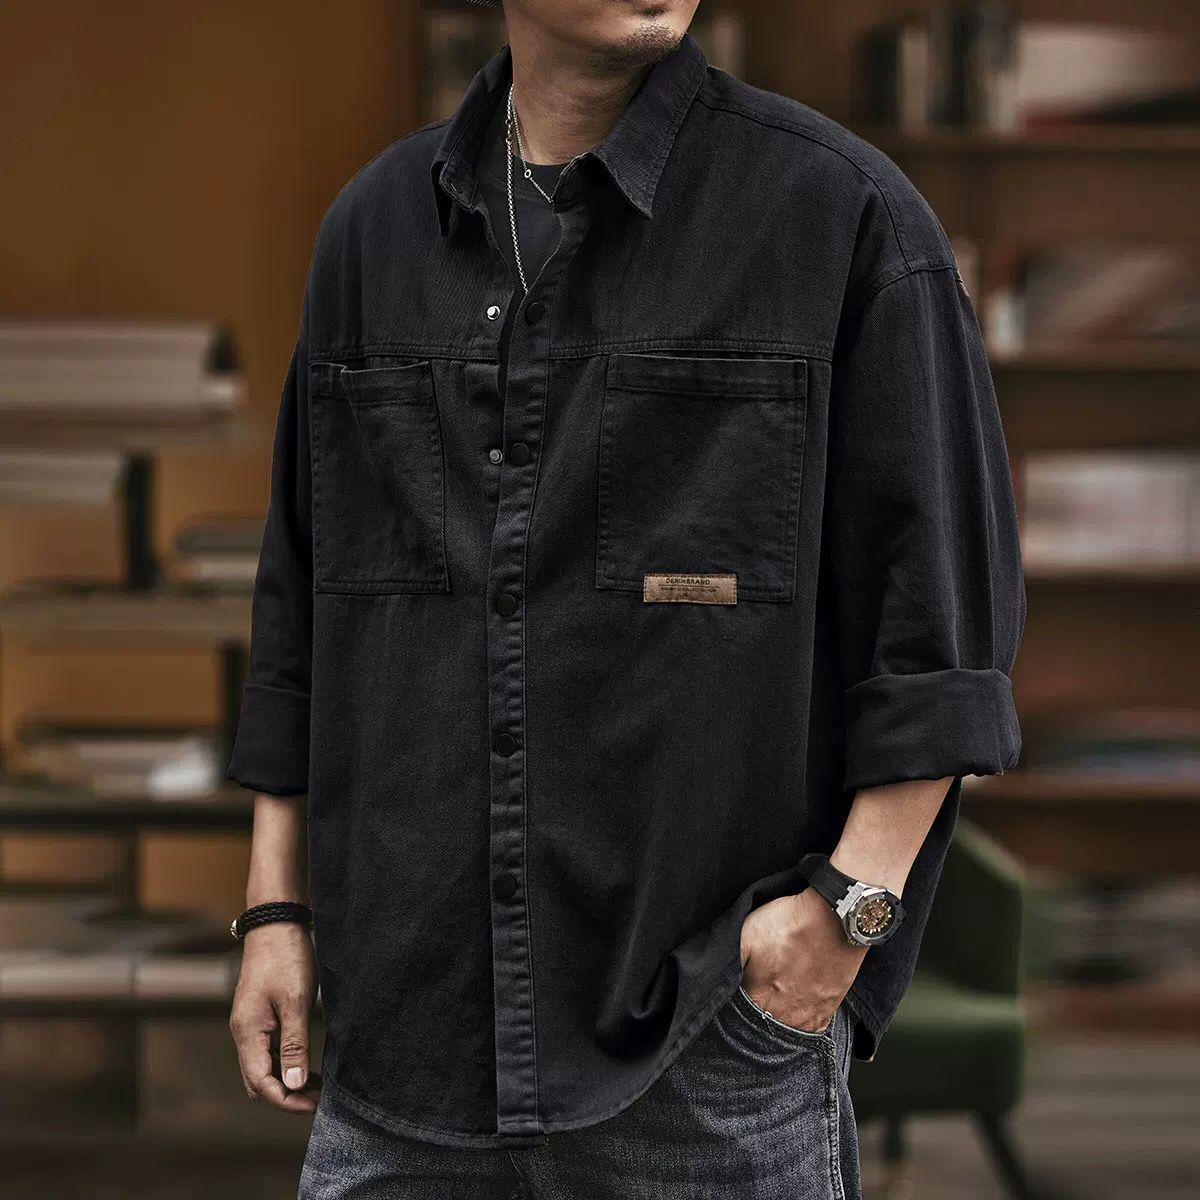 American retro casual men's tooling shirt jacket 2022 spring and autumn construction site loose tide brand men's long-sleeved shirt